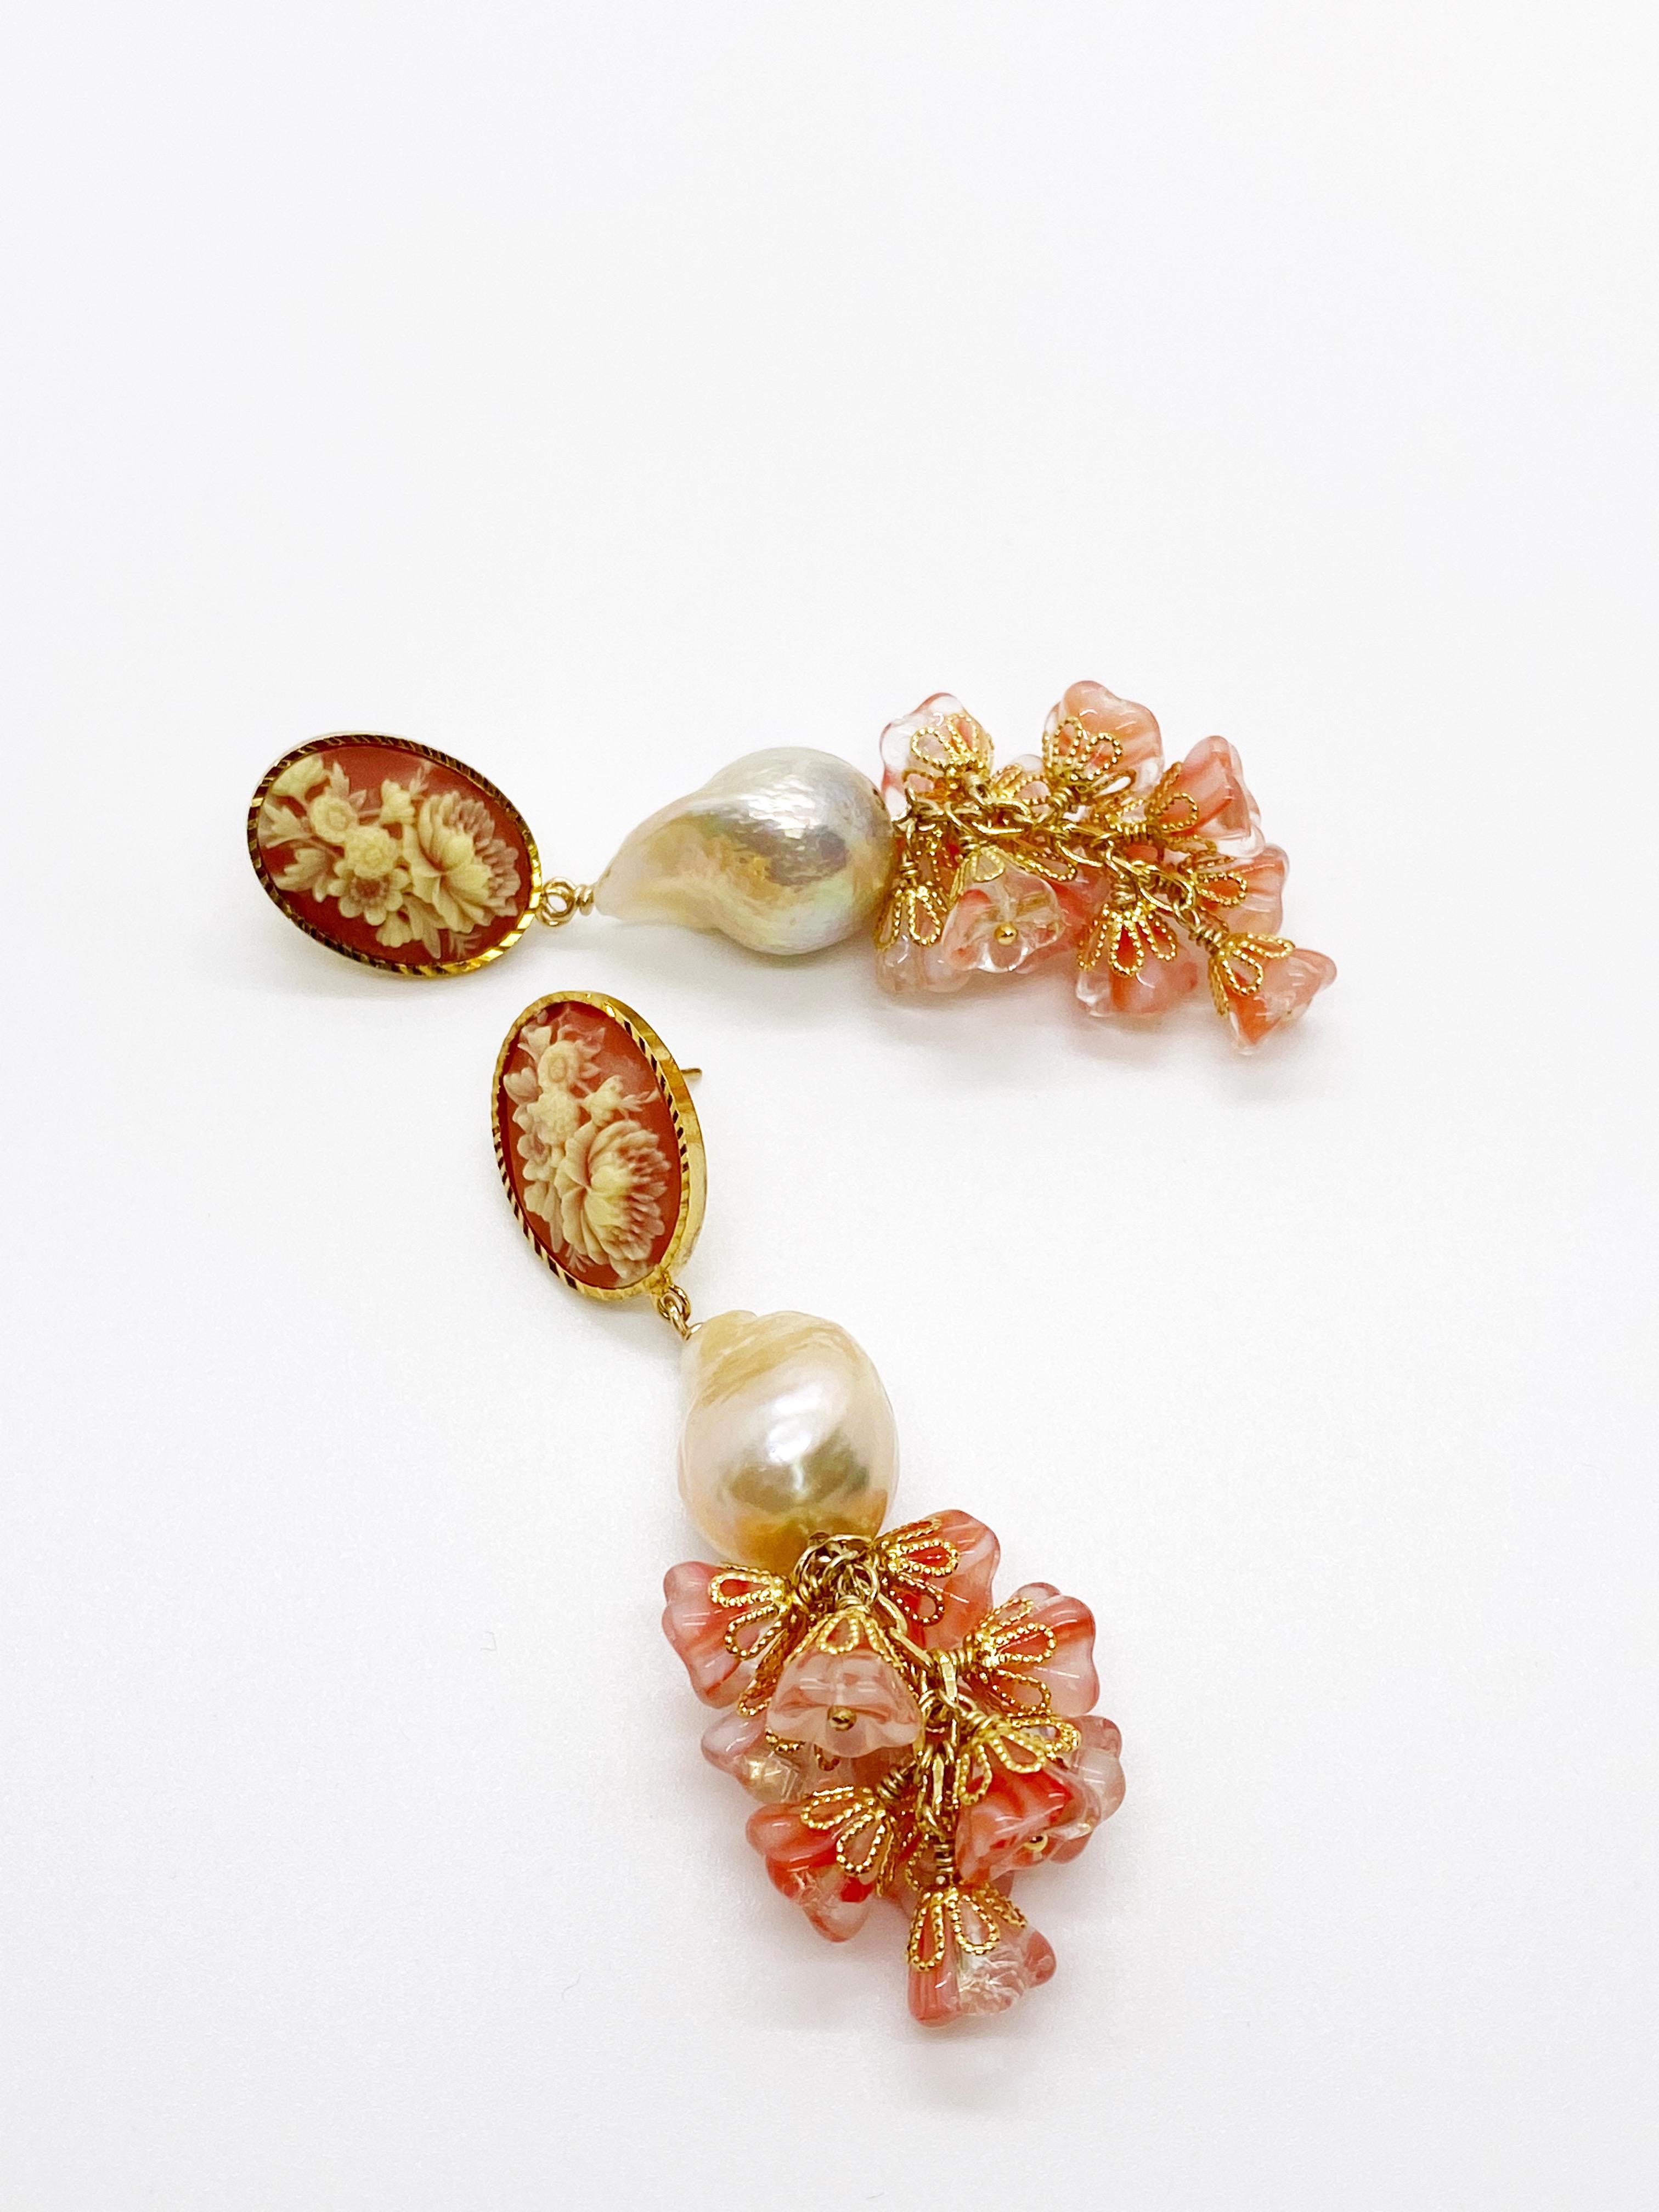 The earrings consist of a vintage Western Germany cabochon with ivory floral relief that is rich with texture. 
The cabochon is set on 24K gold-plated setting. A natural baroque pearl hangs on the cabochon with 10 Czech glass floral bells that